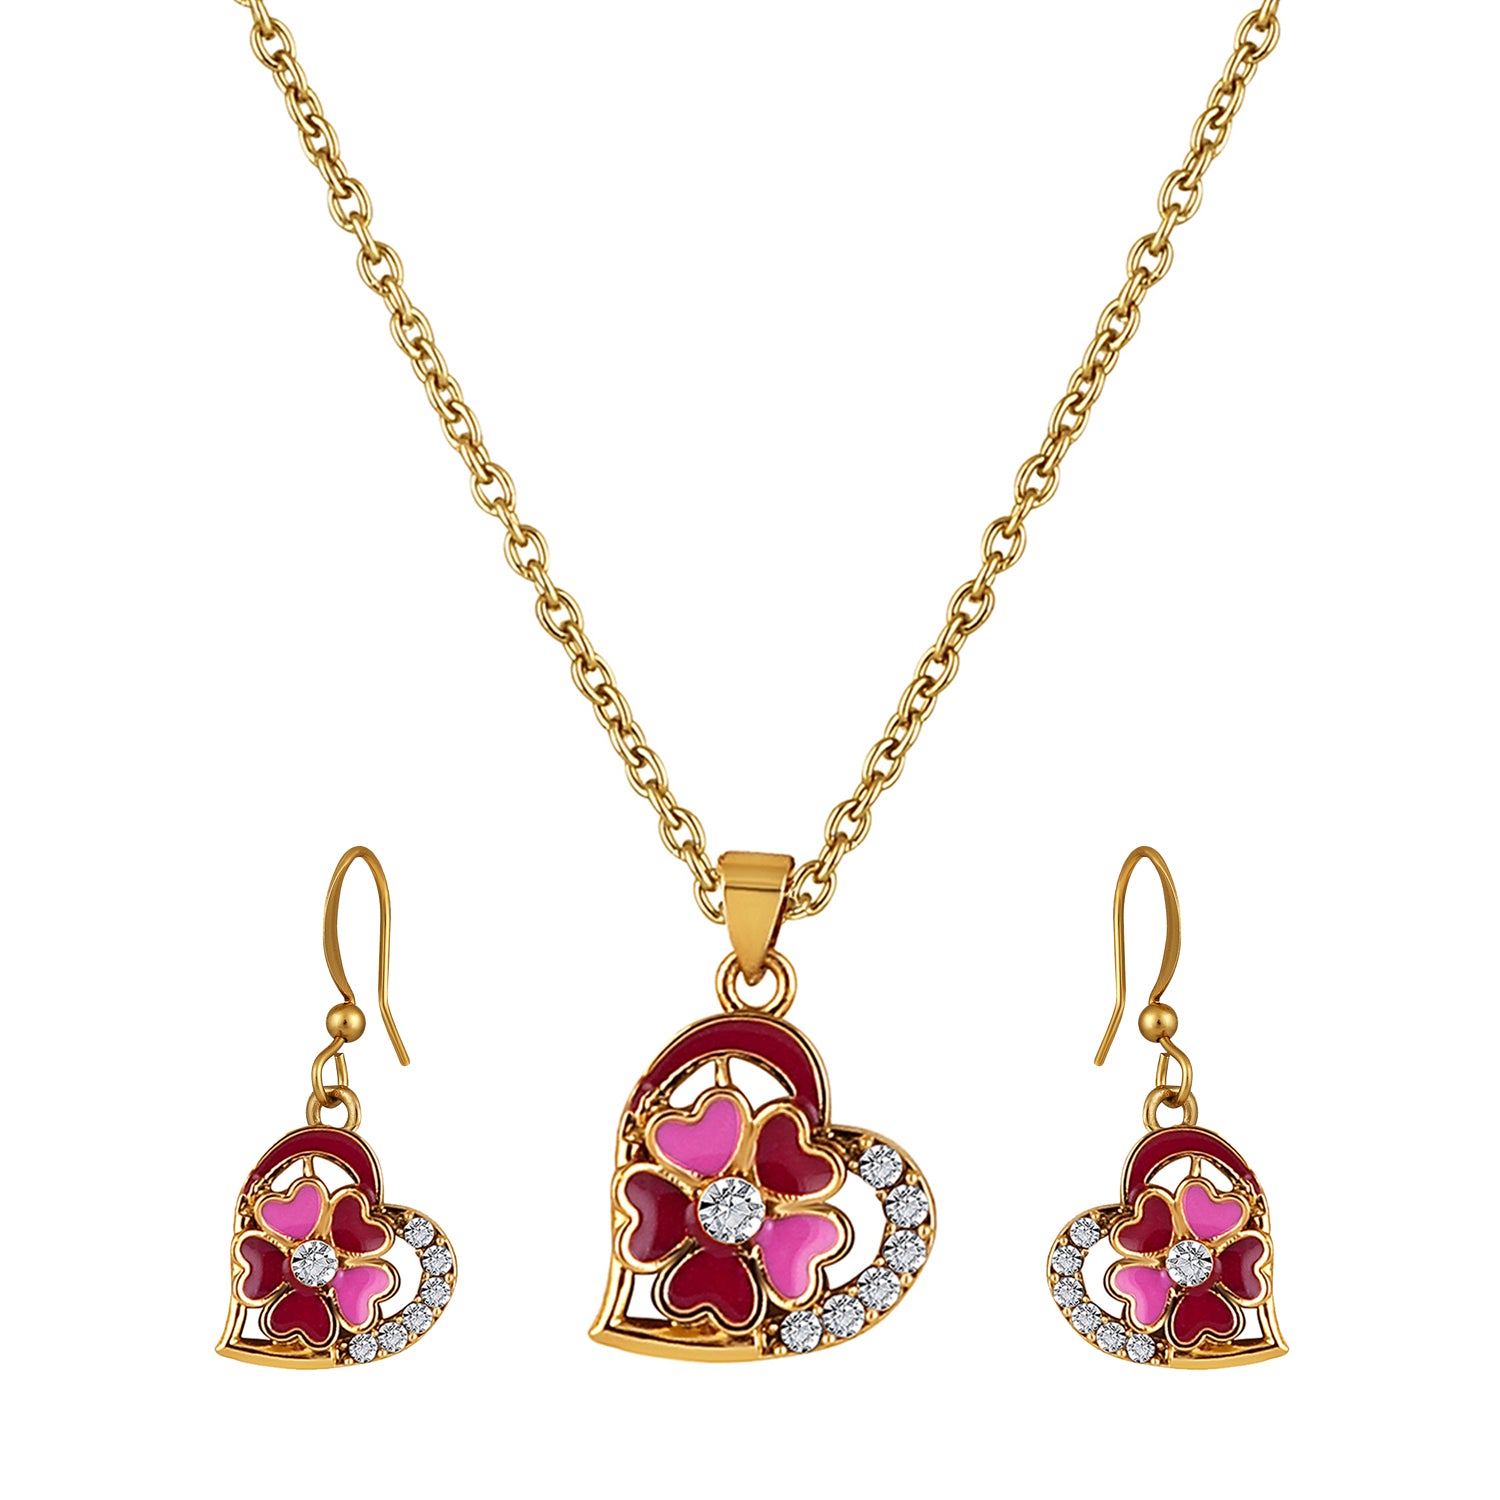 Red and Pink Meenakari Work and Crystals Floral Heart Pendant Set